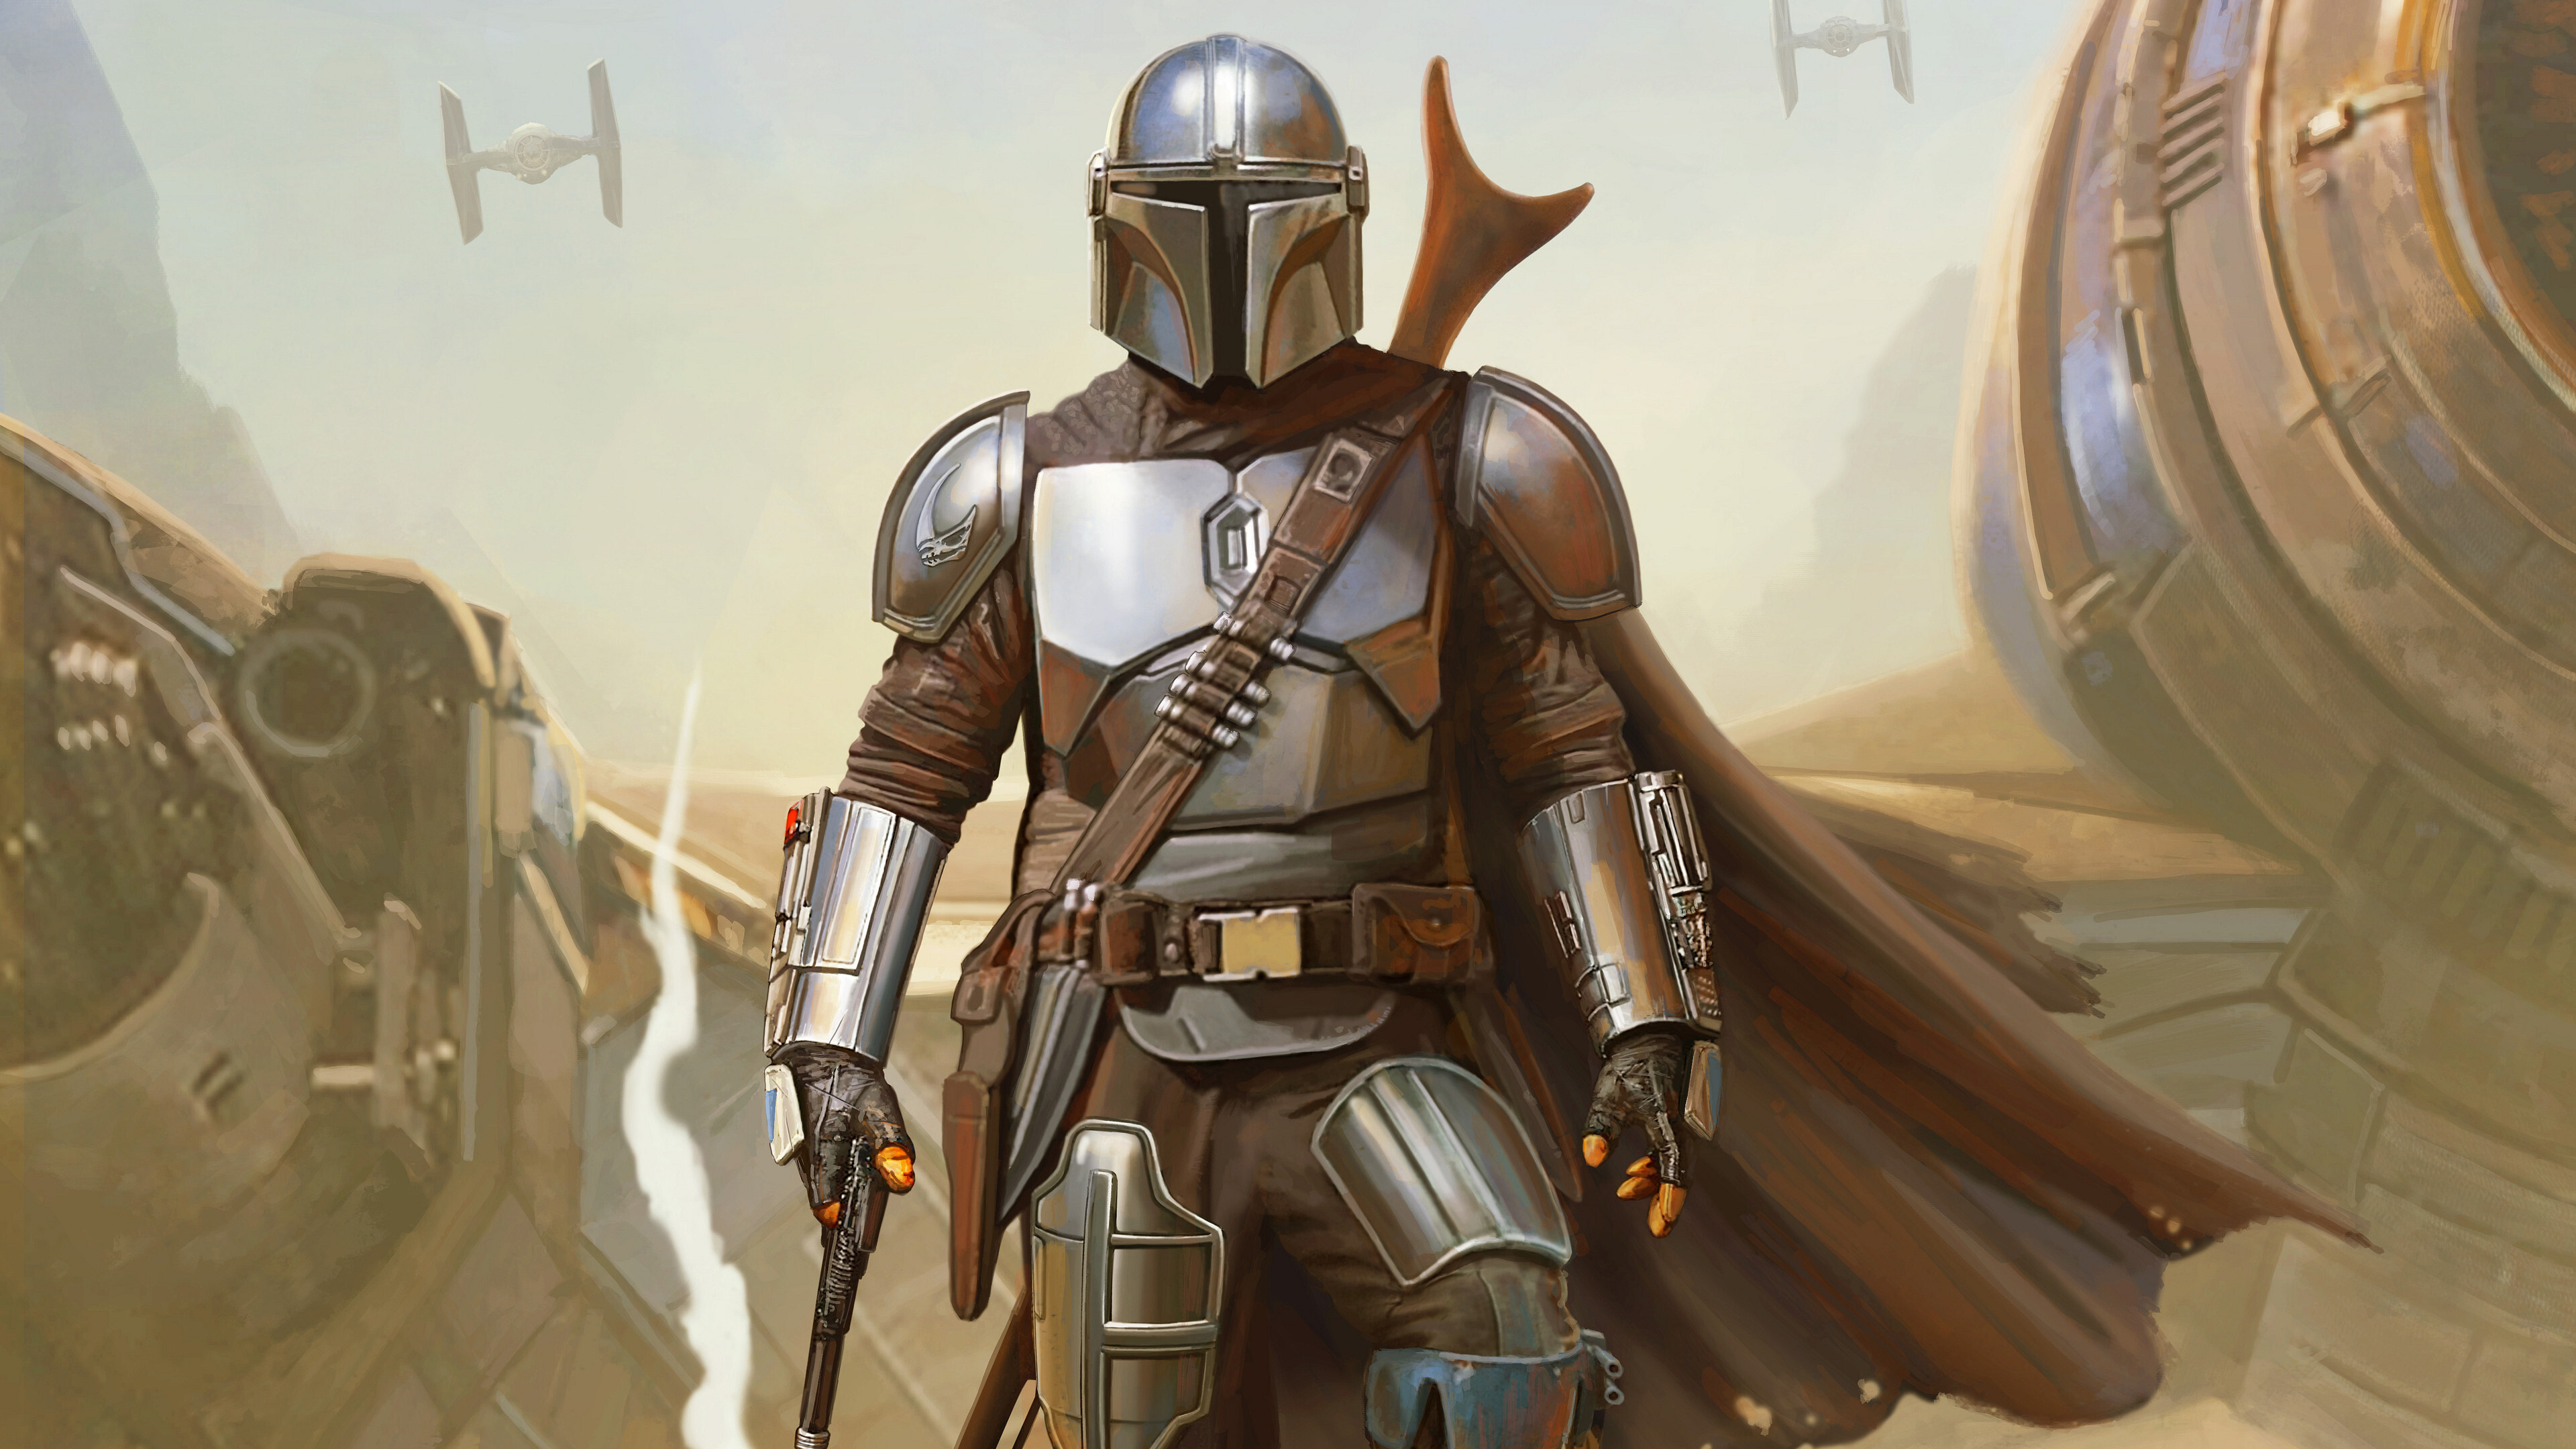 The Mandalorian: A tough, resourceful, and efficient warrior, Star Wars protagonist. 3840x2160 4K Background.